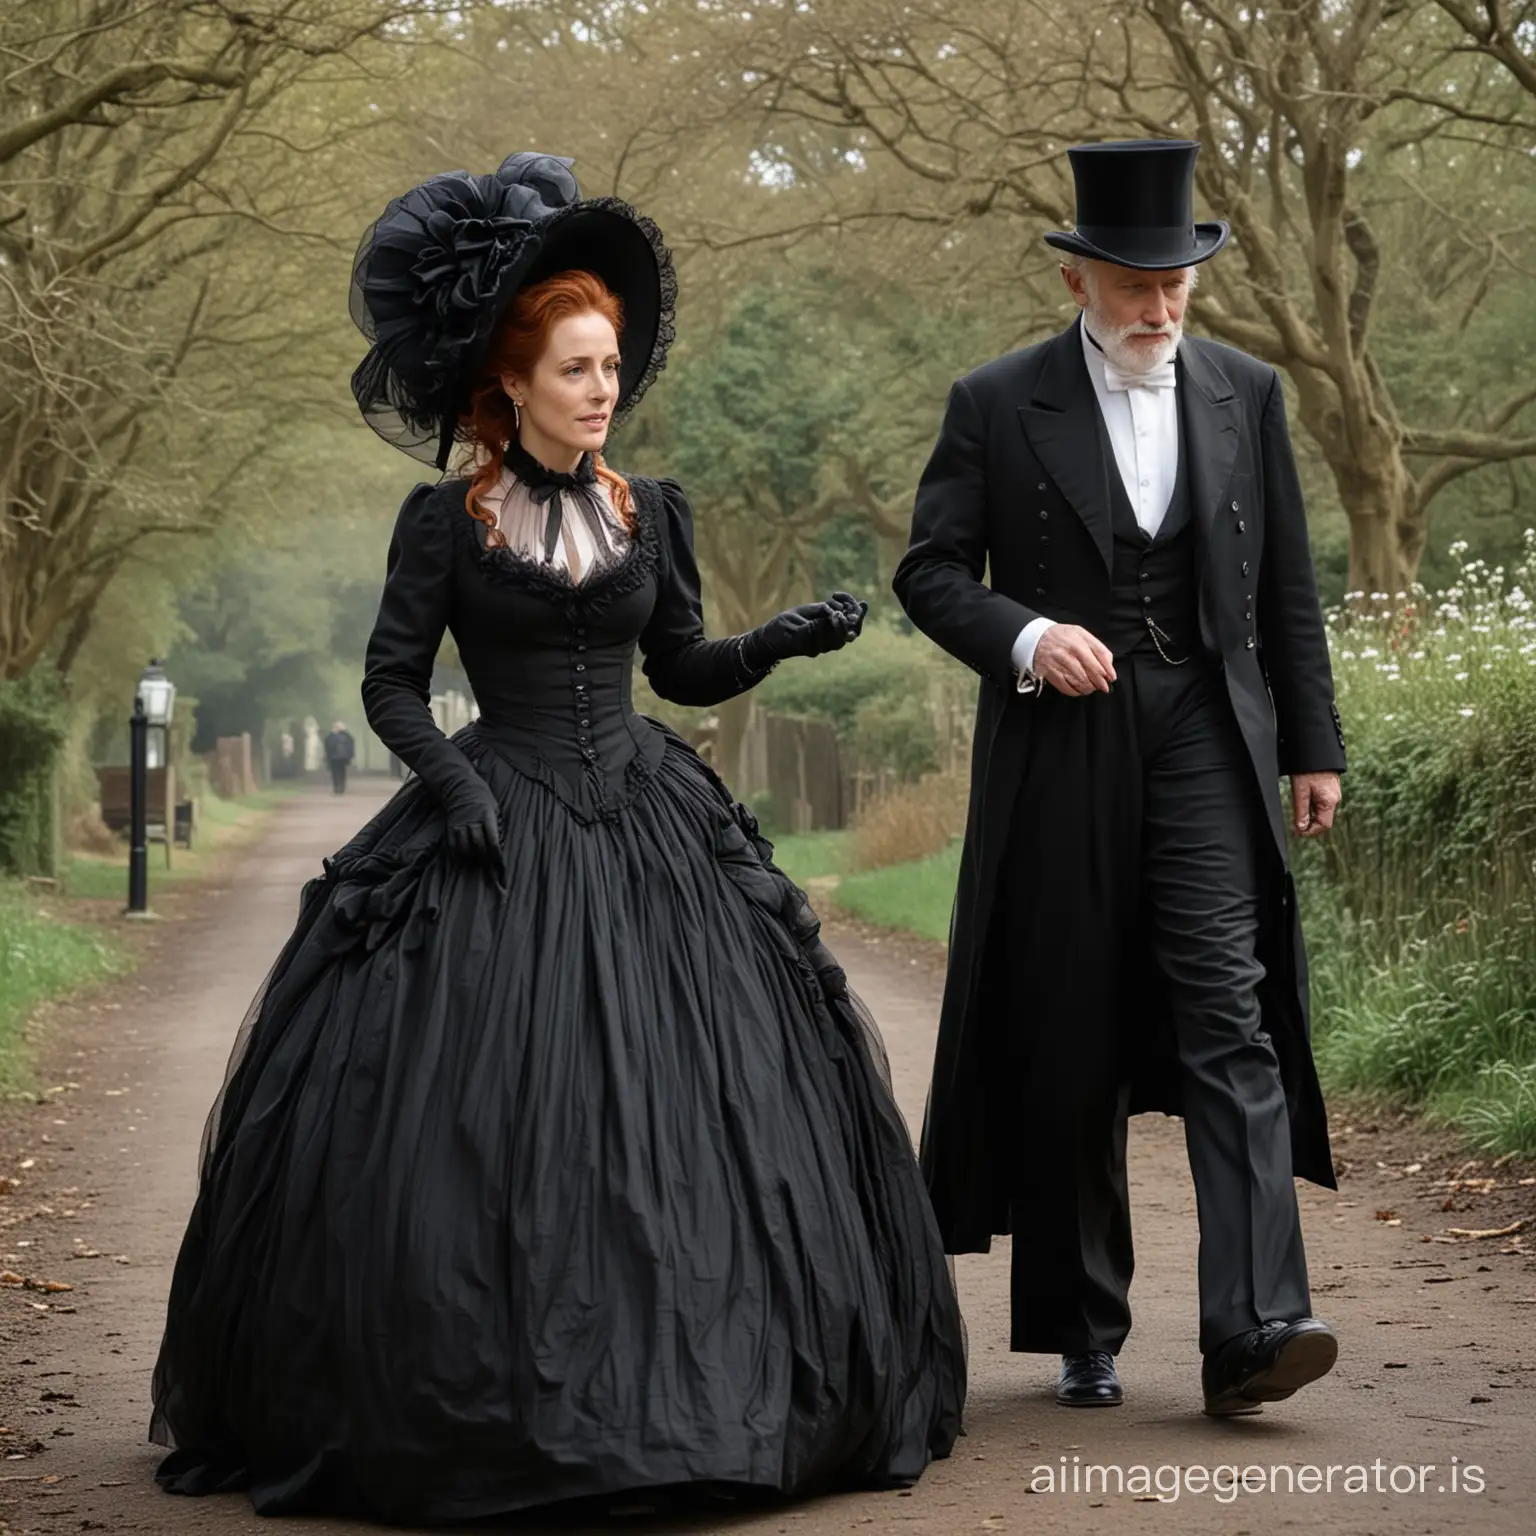 red hair Gillian Anderson wearing a black floor-length loose billowing 1860 Victorian crinoline poofy dress with a frilly bonnet walking with an old man dressed into a black Victorian suit who seems to be her newlywed husband